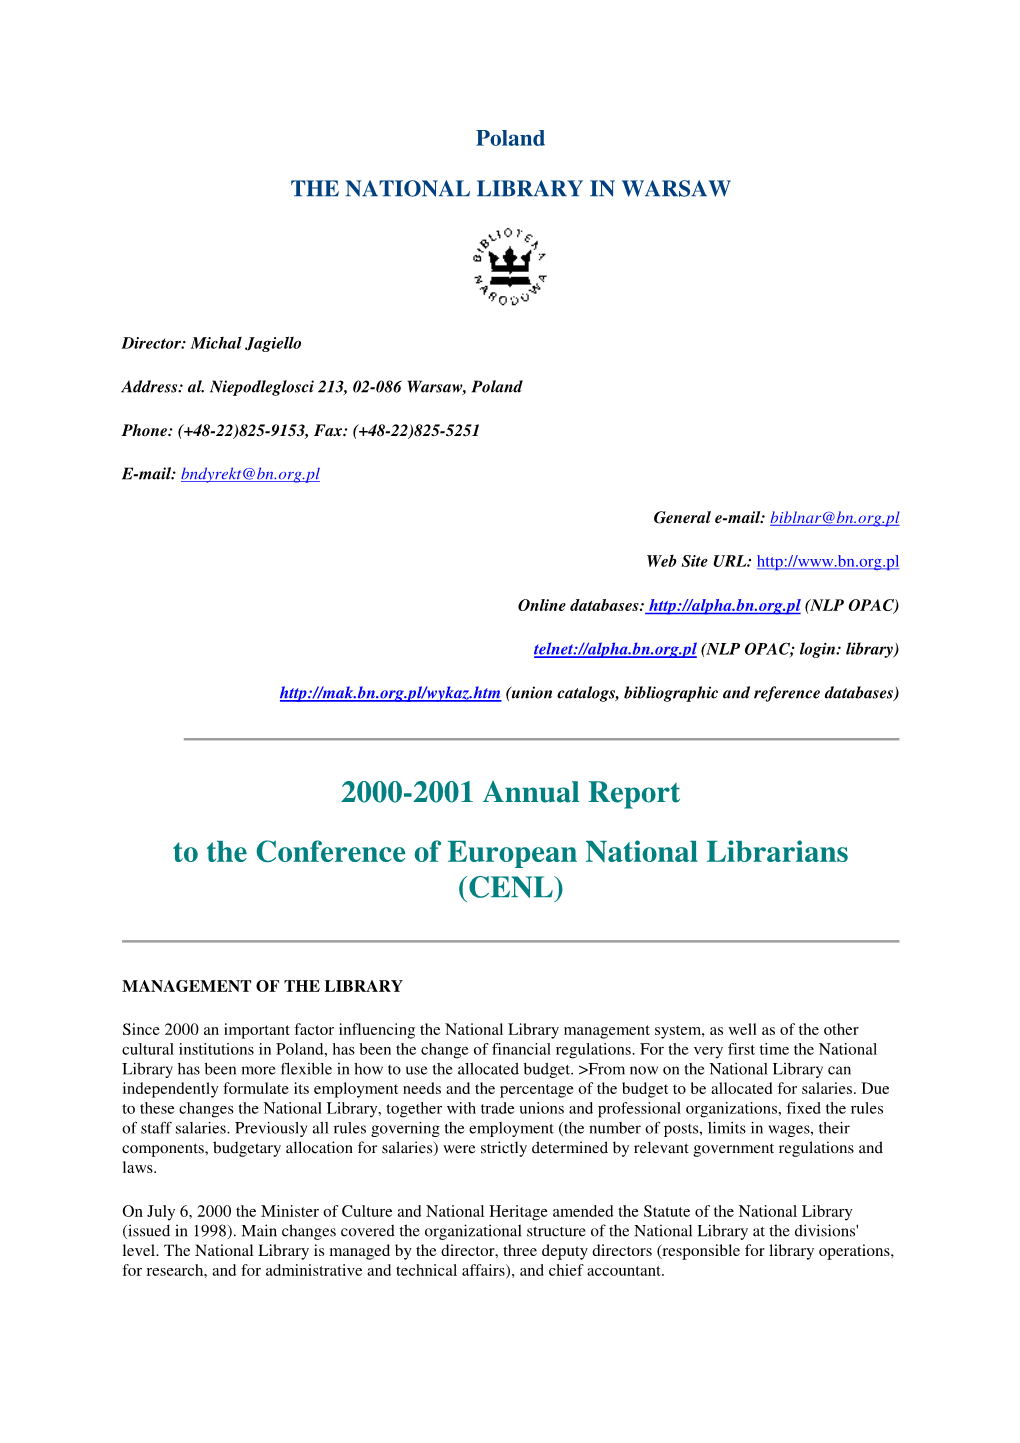 2000-2001 Annual Report to the Conference of European National Librarians (CENL)